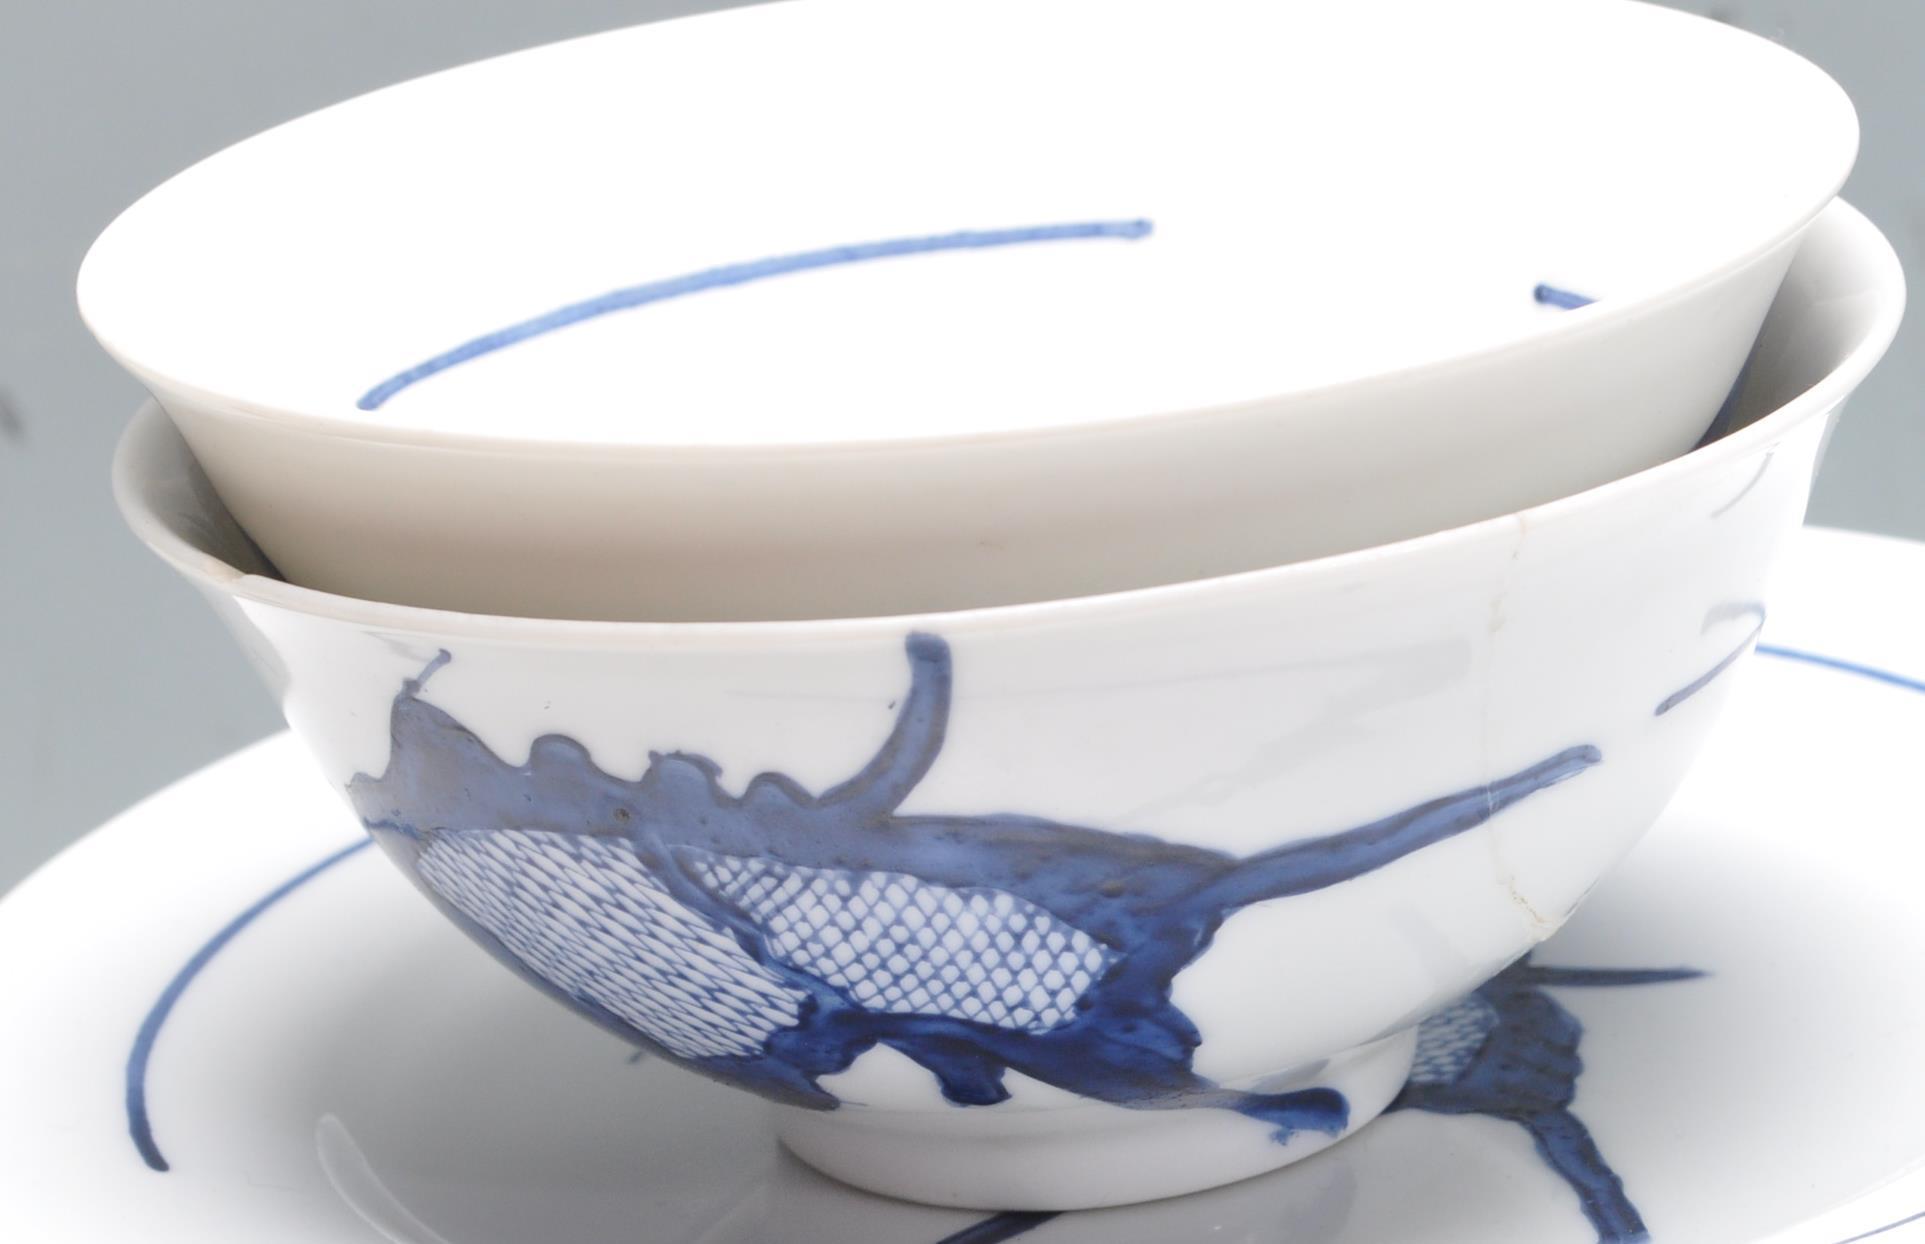 MID 20TH CENTURY RAOPING KOI CARP BLUE AND WHITE DINNER SERVICE - Image 5 of 9